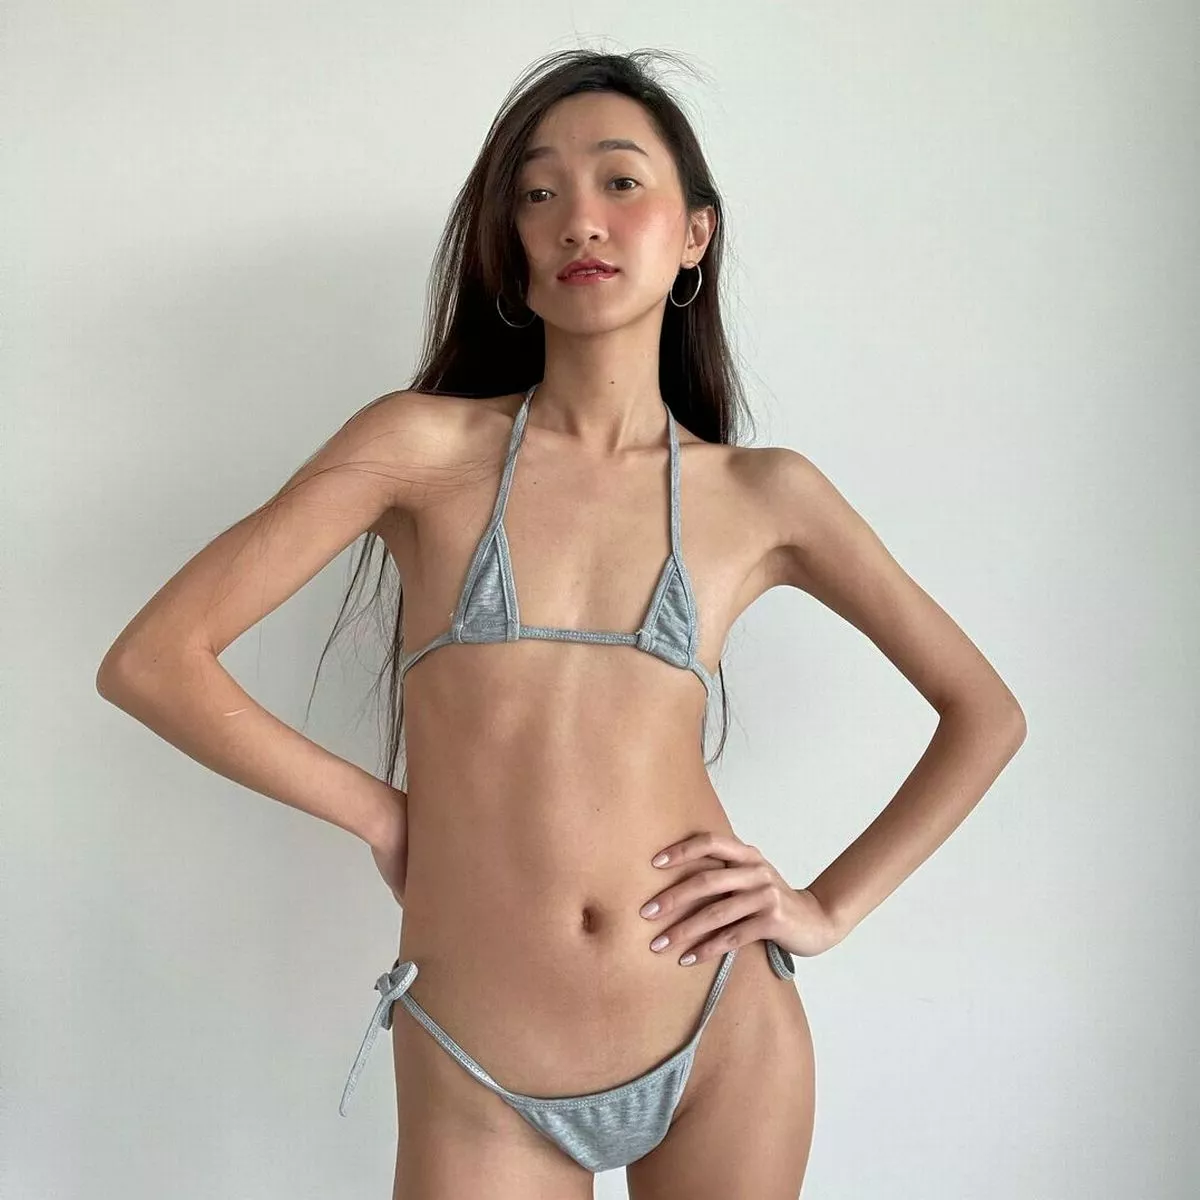 alex mar recommends Flat Chested Girls In Bikinis